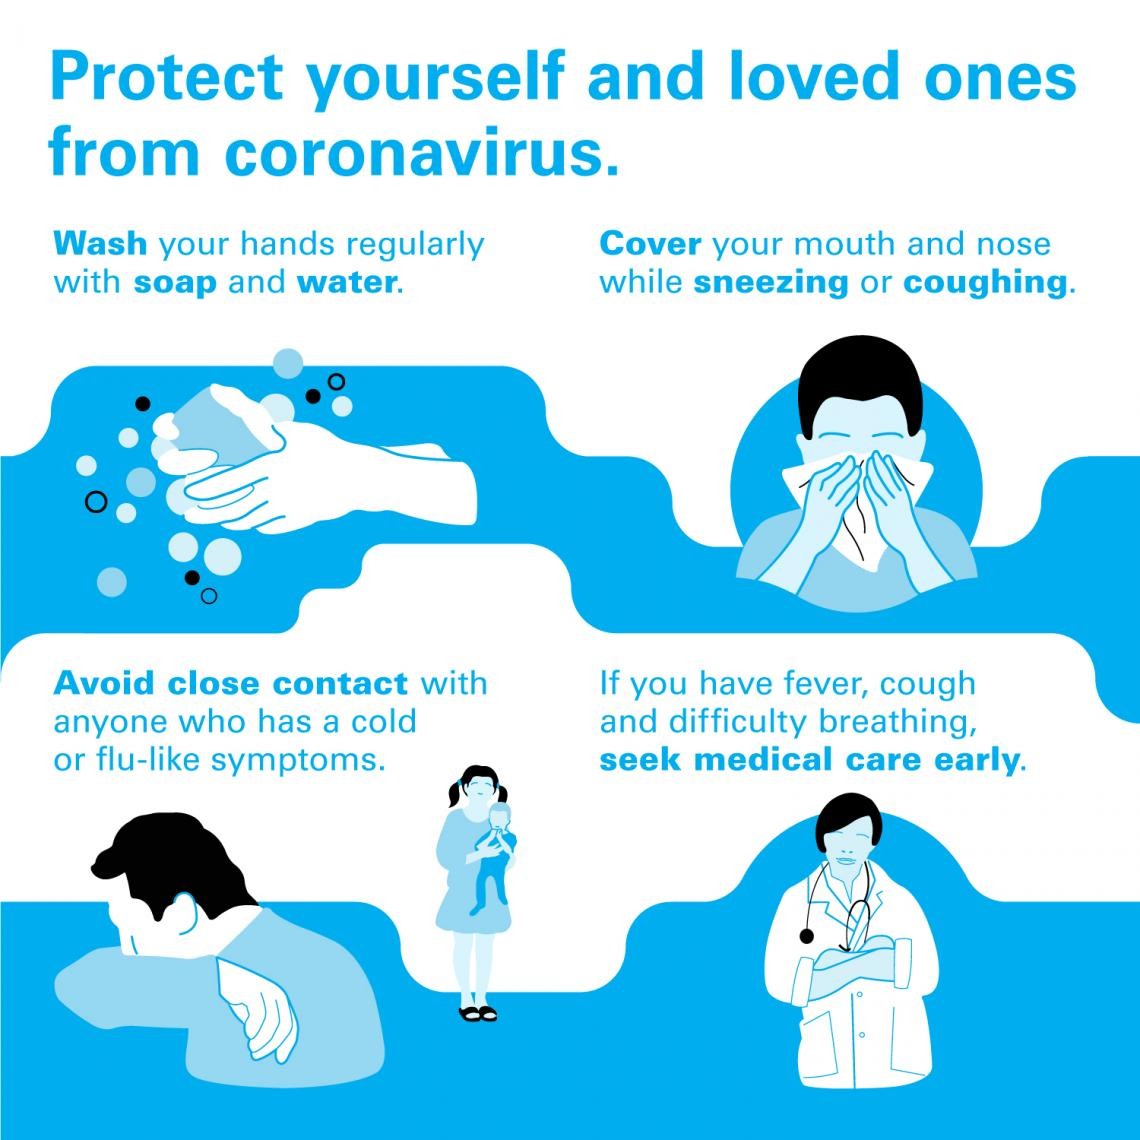 6 Things Must Know About COVID-19 to Protect Yourself And Your Children